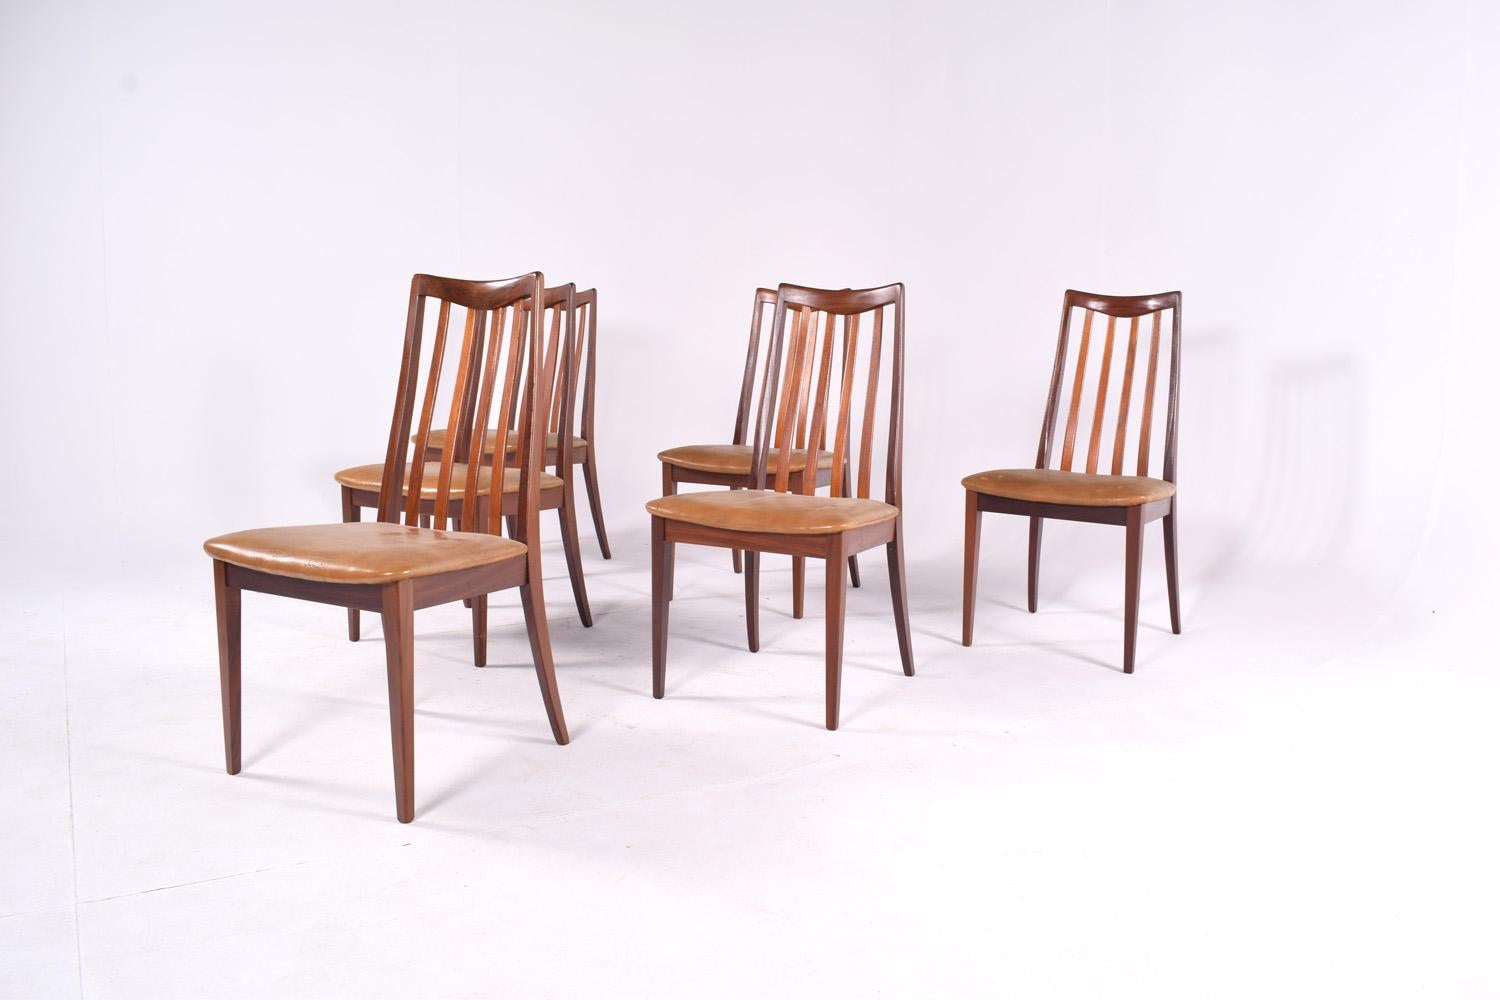 A set of 6 original G-Plan dining chairs, with solid teak frames and the original brown vinyl seating with very elegant back rests.